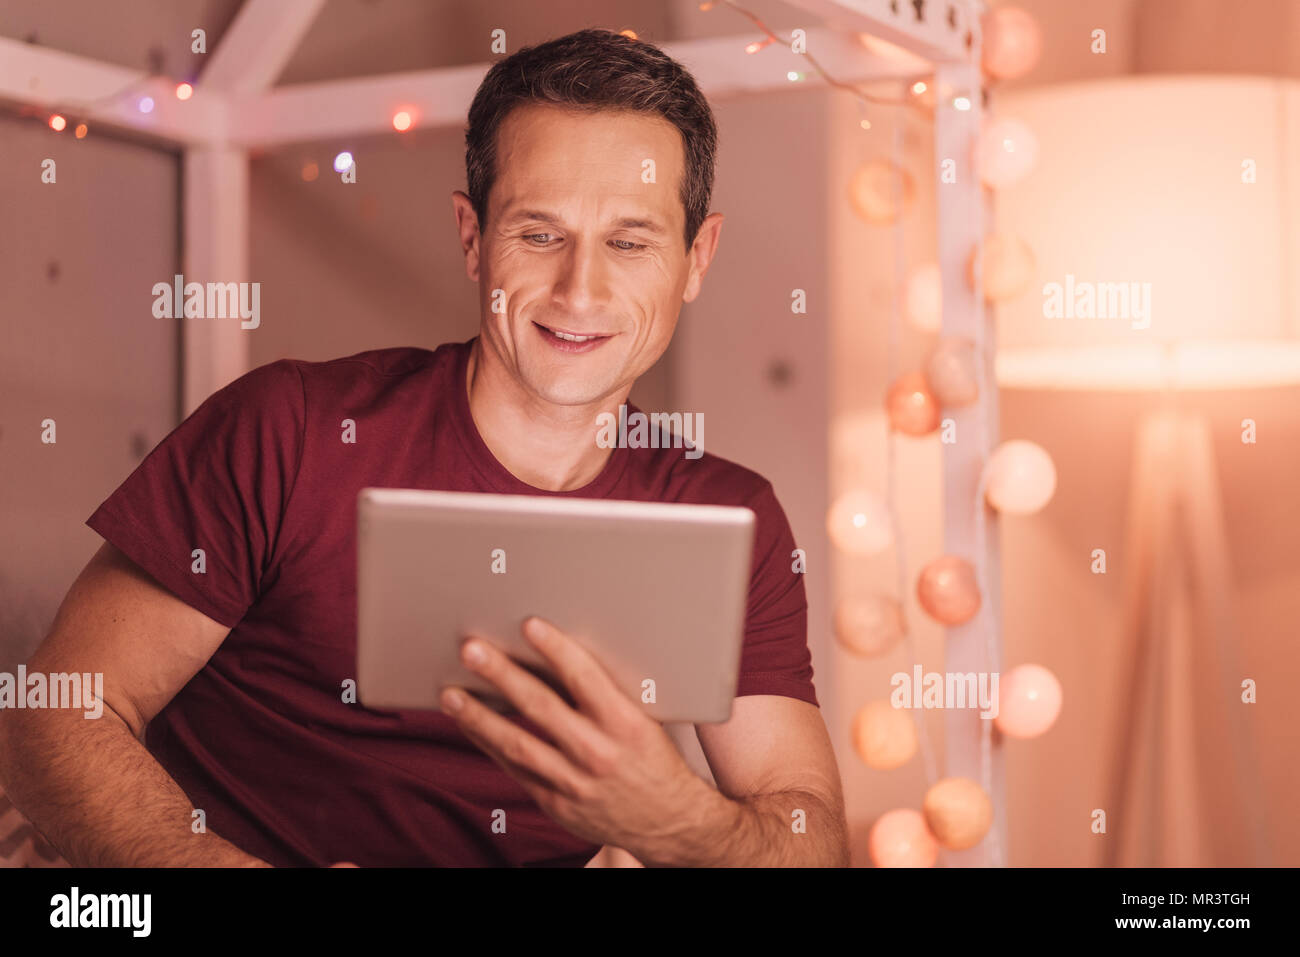 Cheerful young man looking at the tablet screen Stock Photo